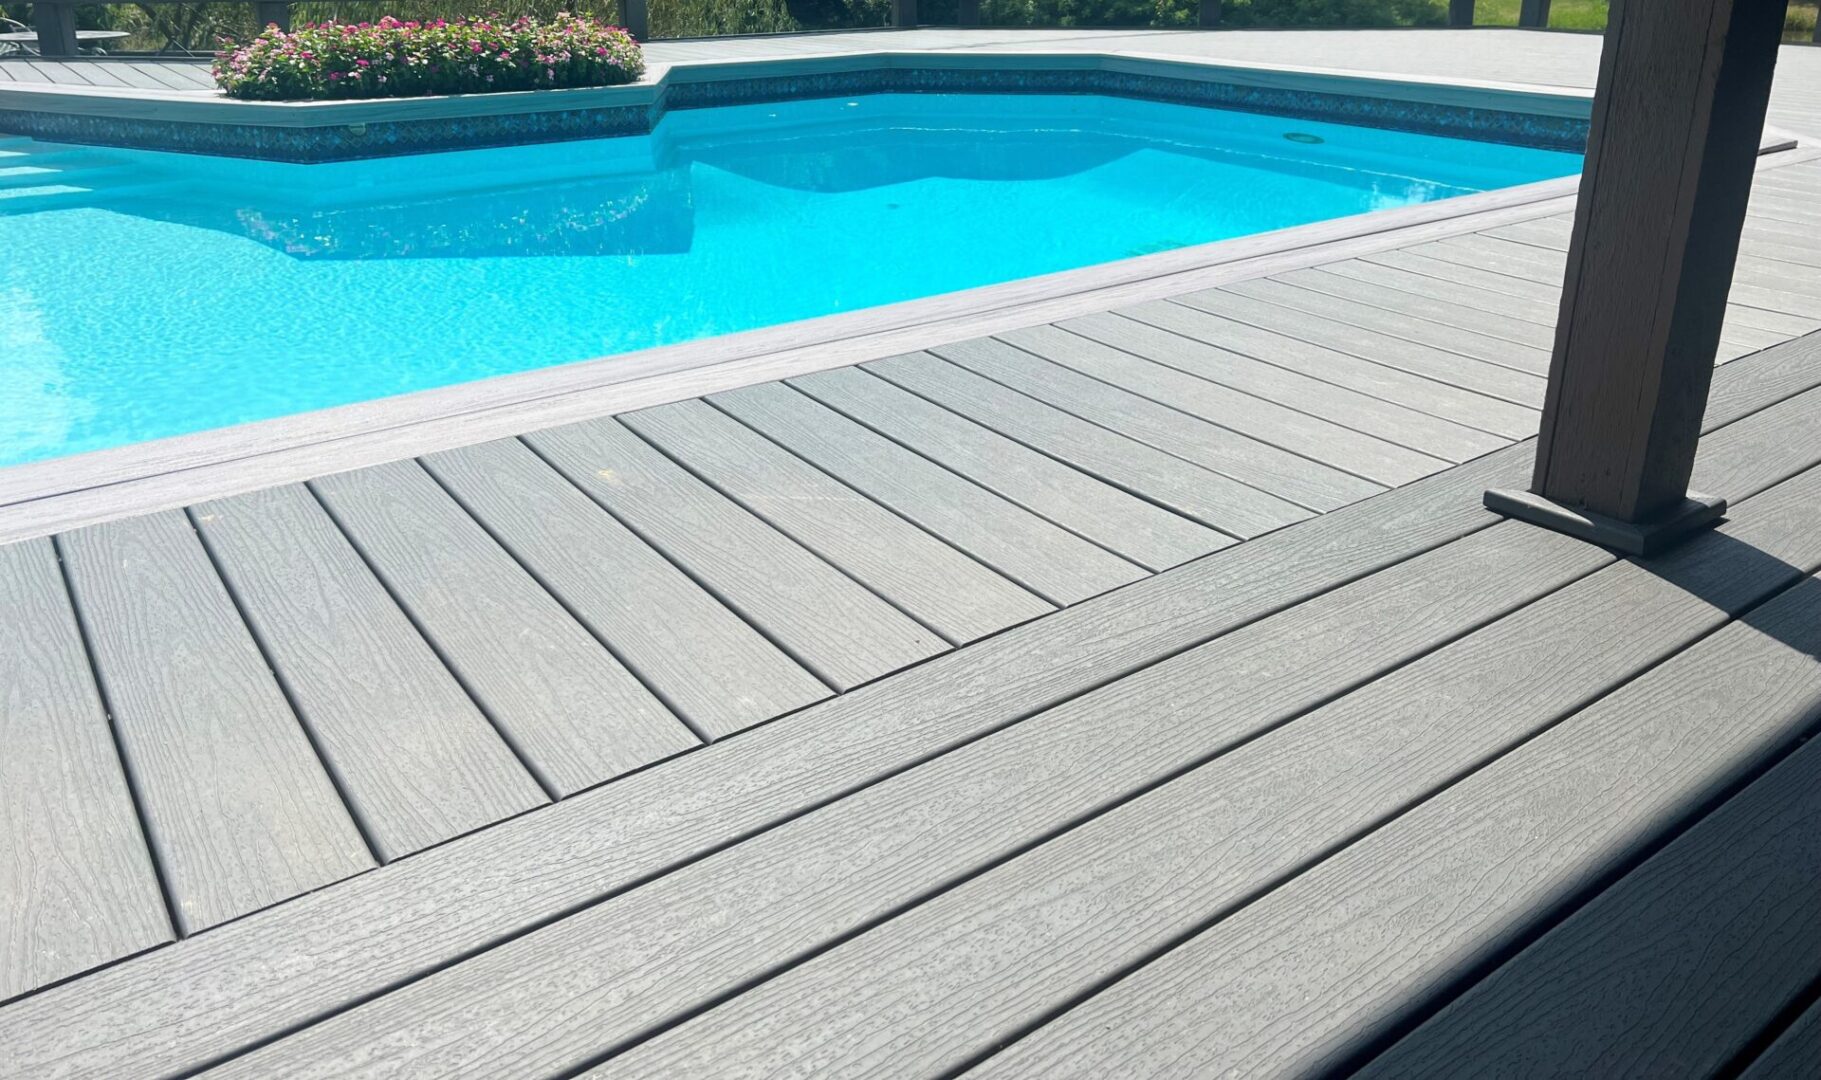 A pool with a deck and steps in it